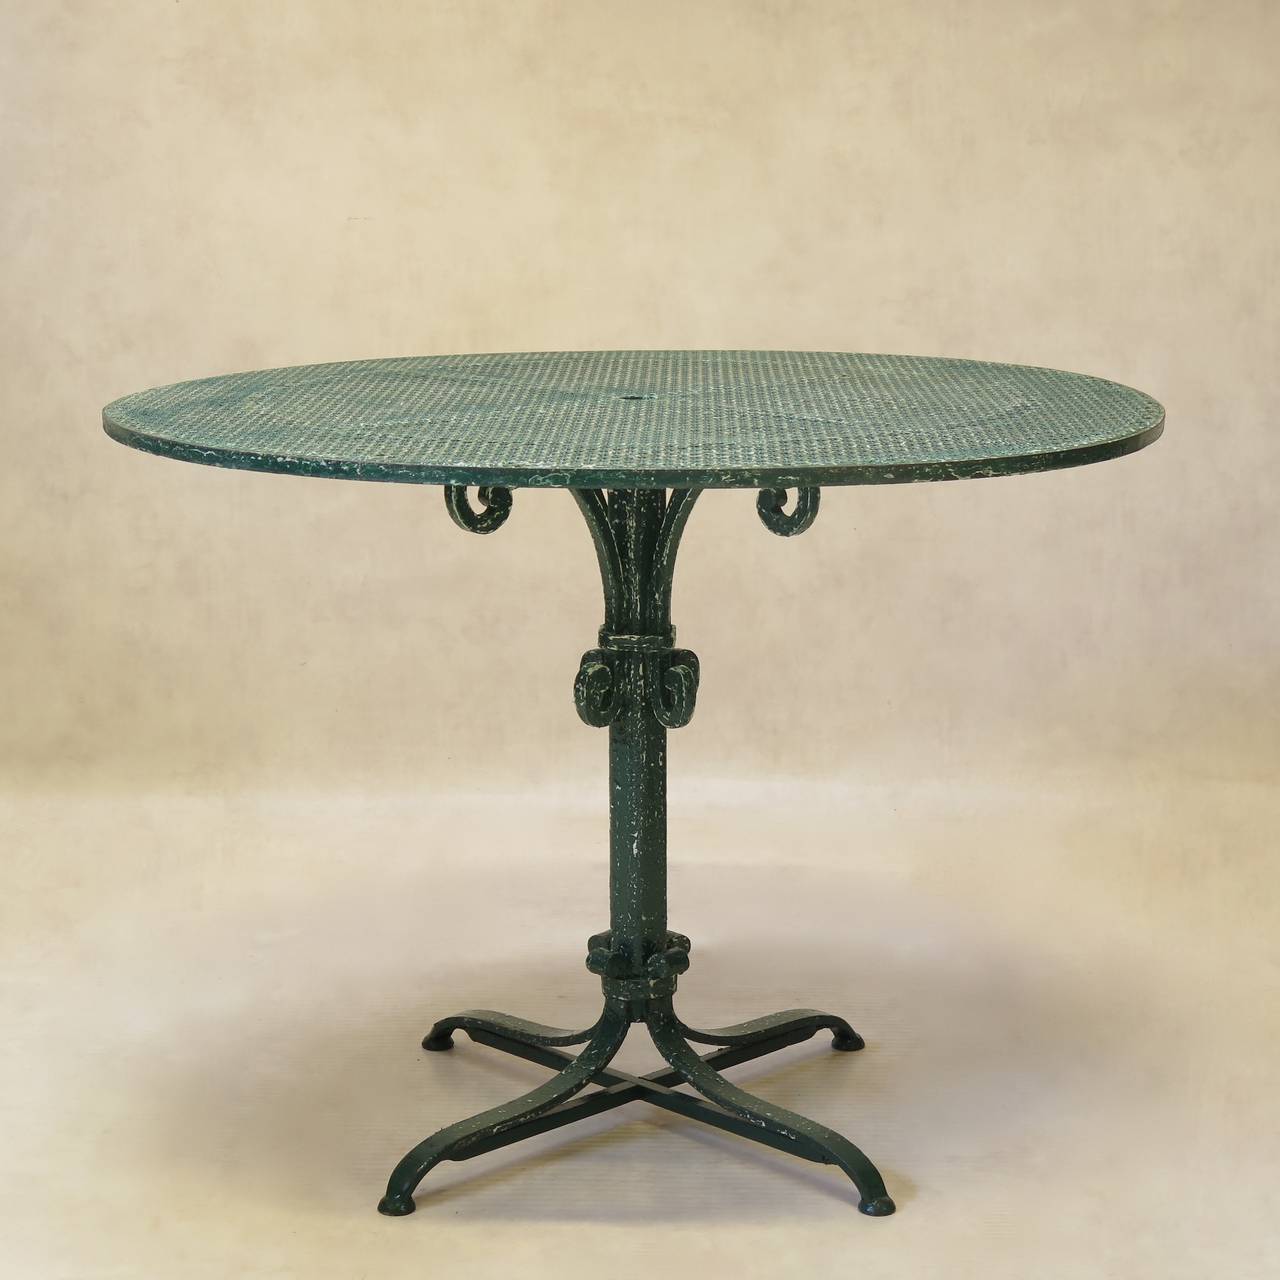 Almost-pair of round wrought iron outdoor dining tables, with cloverleaf-patterned tops and stem bases. Painted in classical garden green colour.

Very slight difference in size, as well as in the shape of the base.

 Dimensions provided below